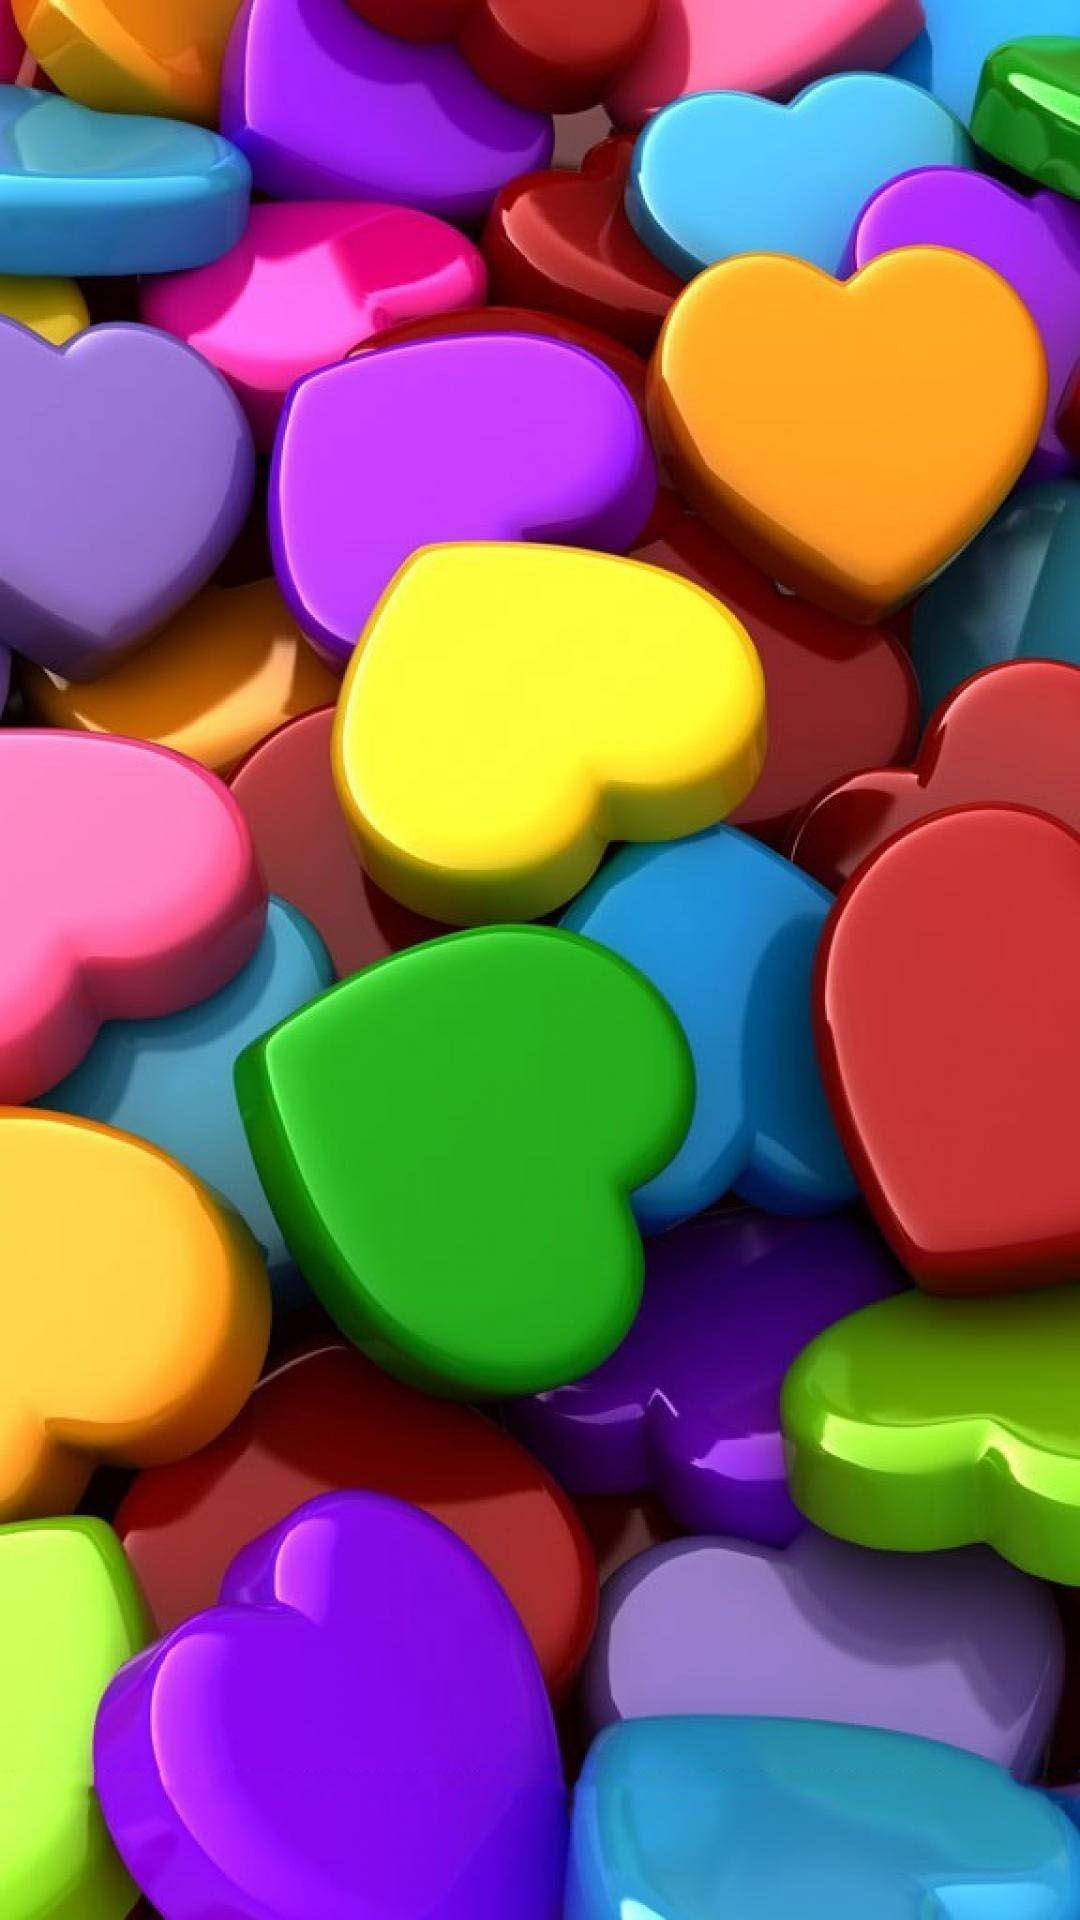 Vibrant 3d Heart Shapes On Android Phone Wallpaper